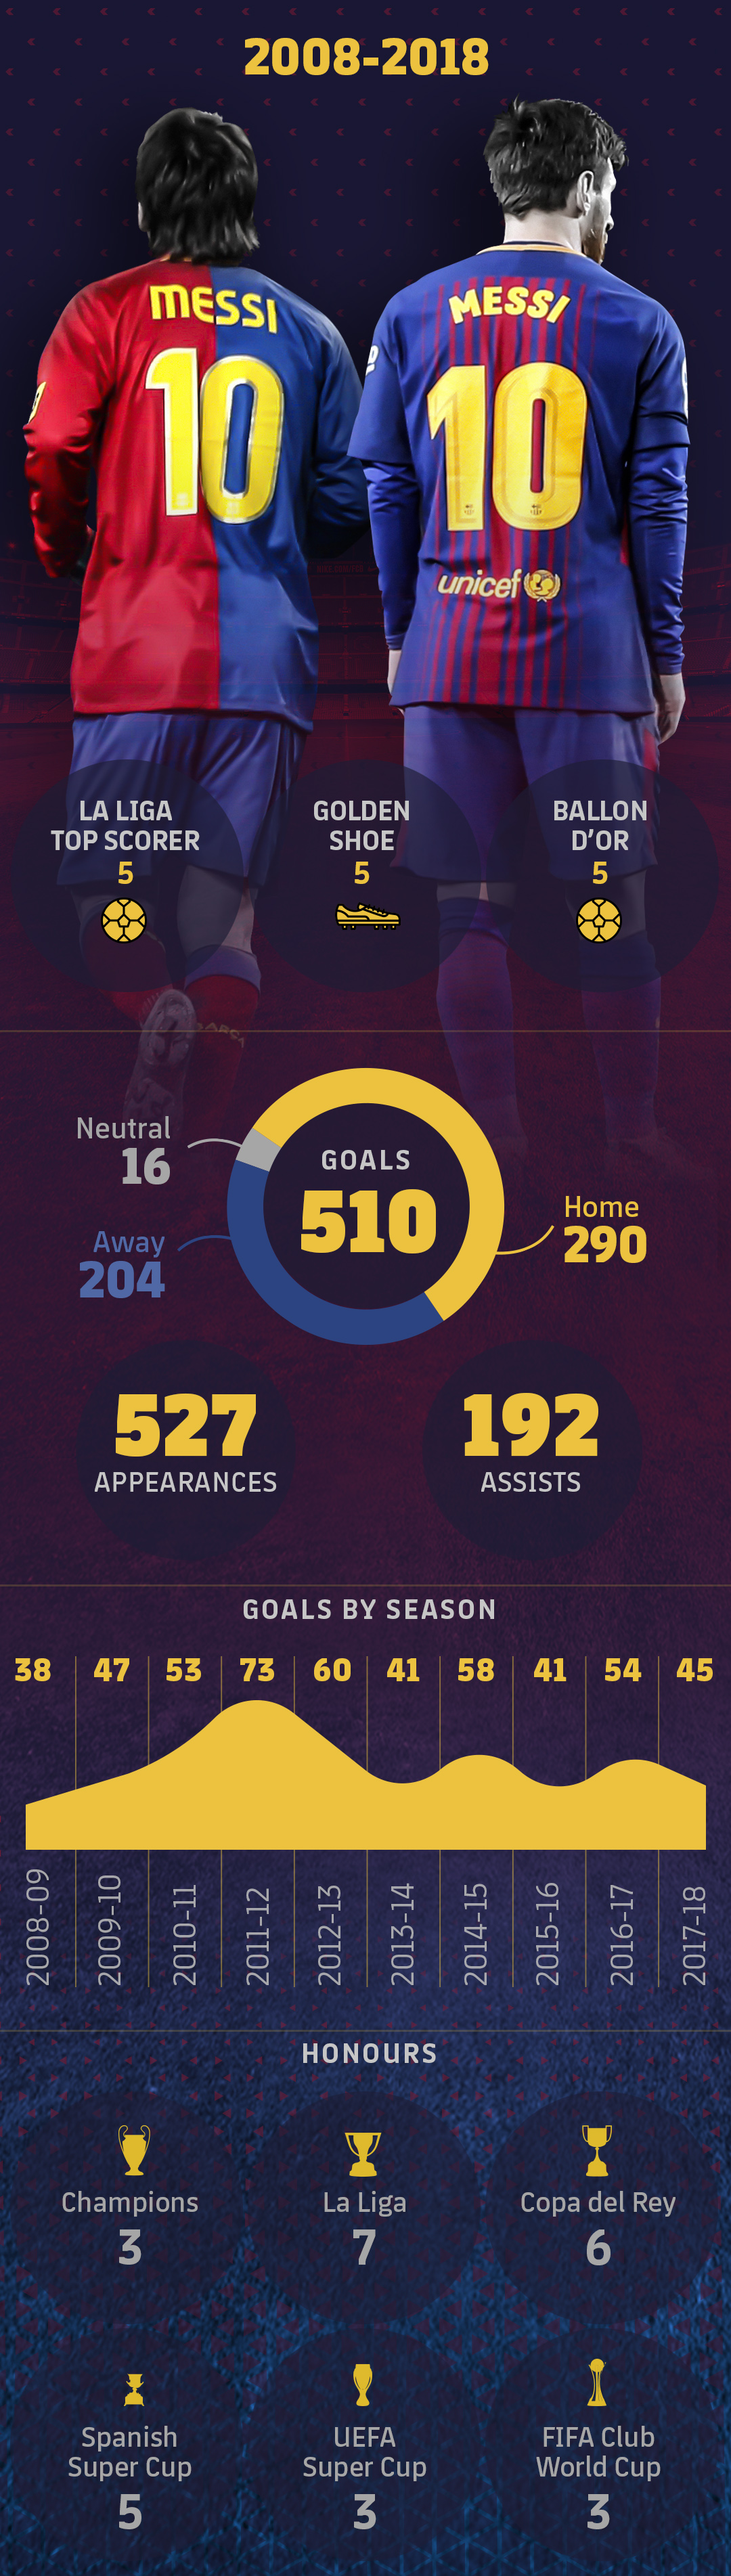 Lionel Messi stats for Barcelona club from 2008 to 2018 Infographic